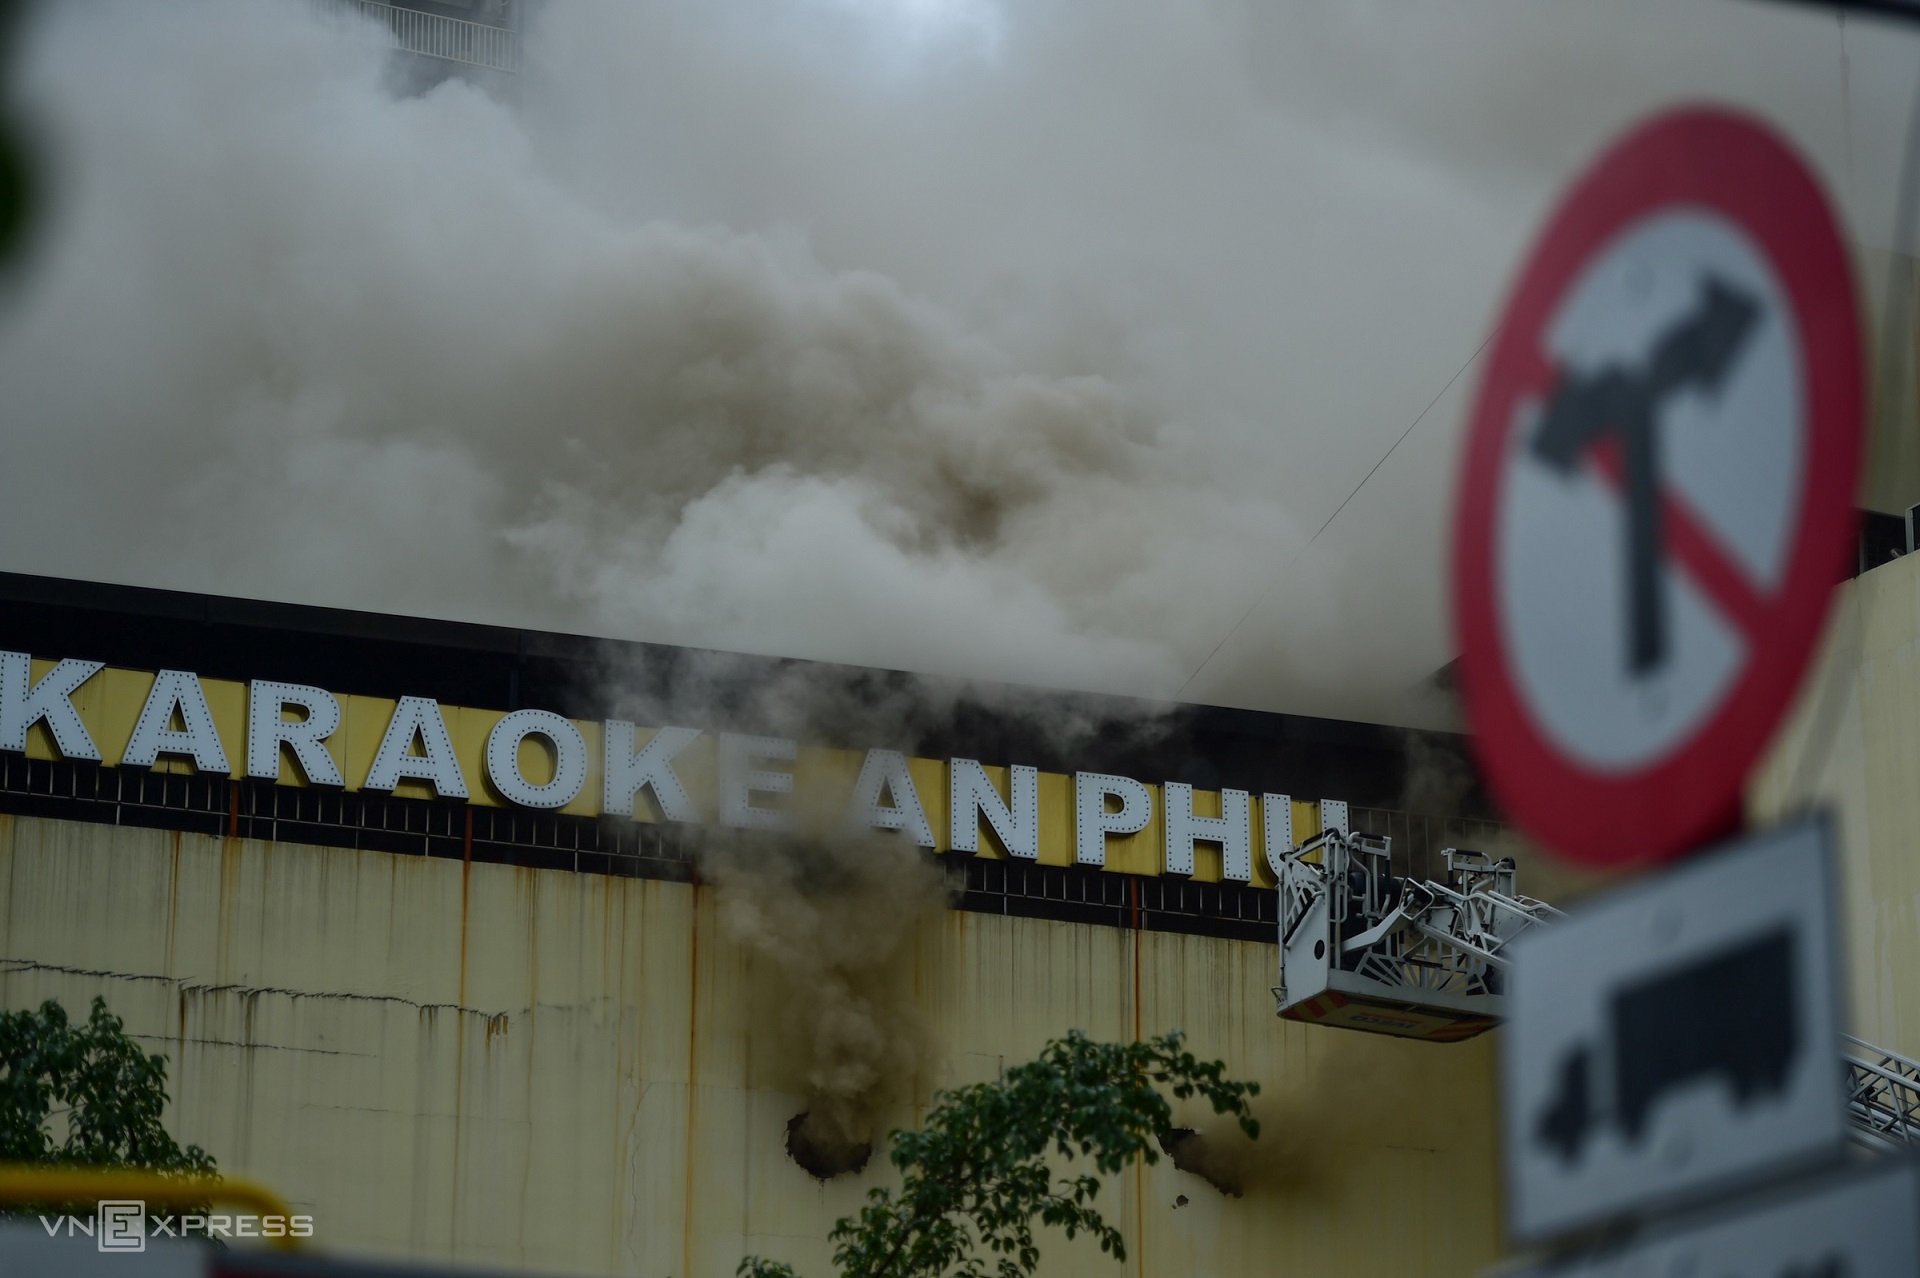 Smoke goes up from inside An Phu karaoke parlor in Binh Duong Province at around noon on September 7, 2022, 16 hours after a fire broke out at the bar and killed 32 people. Credit: VnExpress.